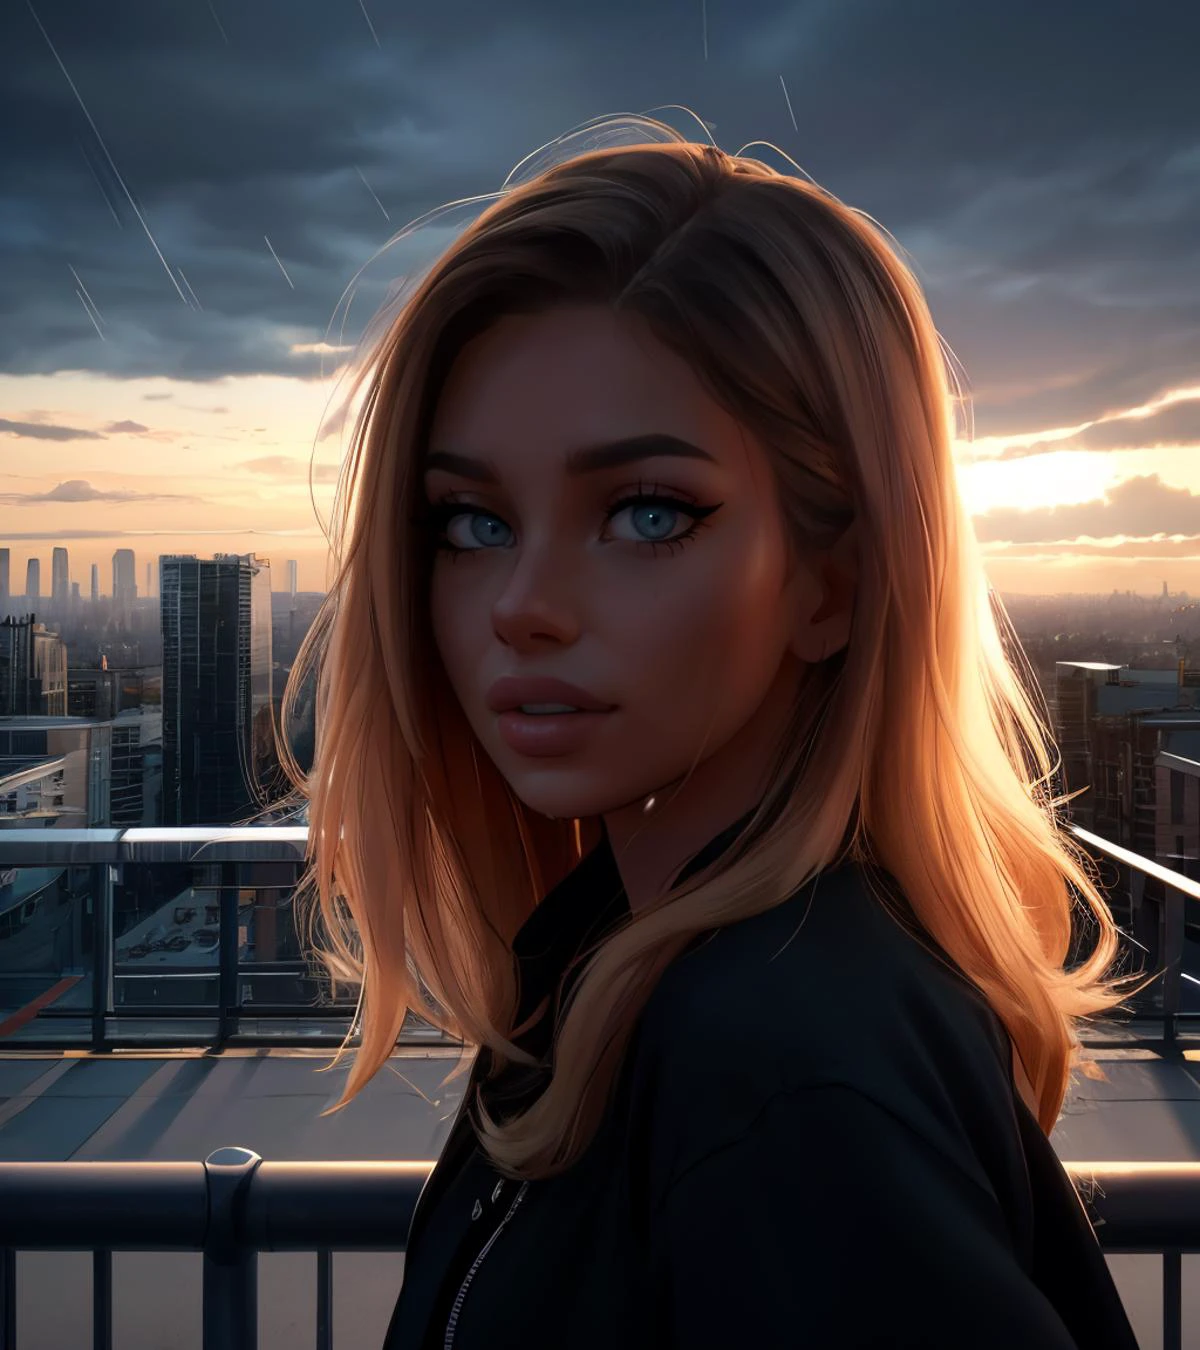 ((Full front shot)),(best quality),((an extremely delicate and beautiful)),  cinematic lighting, (character focus), ((1girl)),  ((upper body)),  blurry, (((close-up))), face, looking at viewer, rain, realistic,  architecture, bridge, building, city, cityscape, dark clouds, outdoors, railing, real world location, road, rooftop, scenery, sky, skyscraper, stairs, street
 